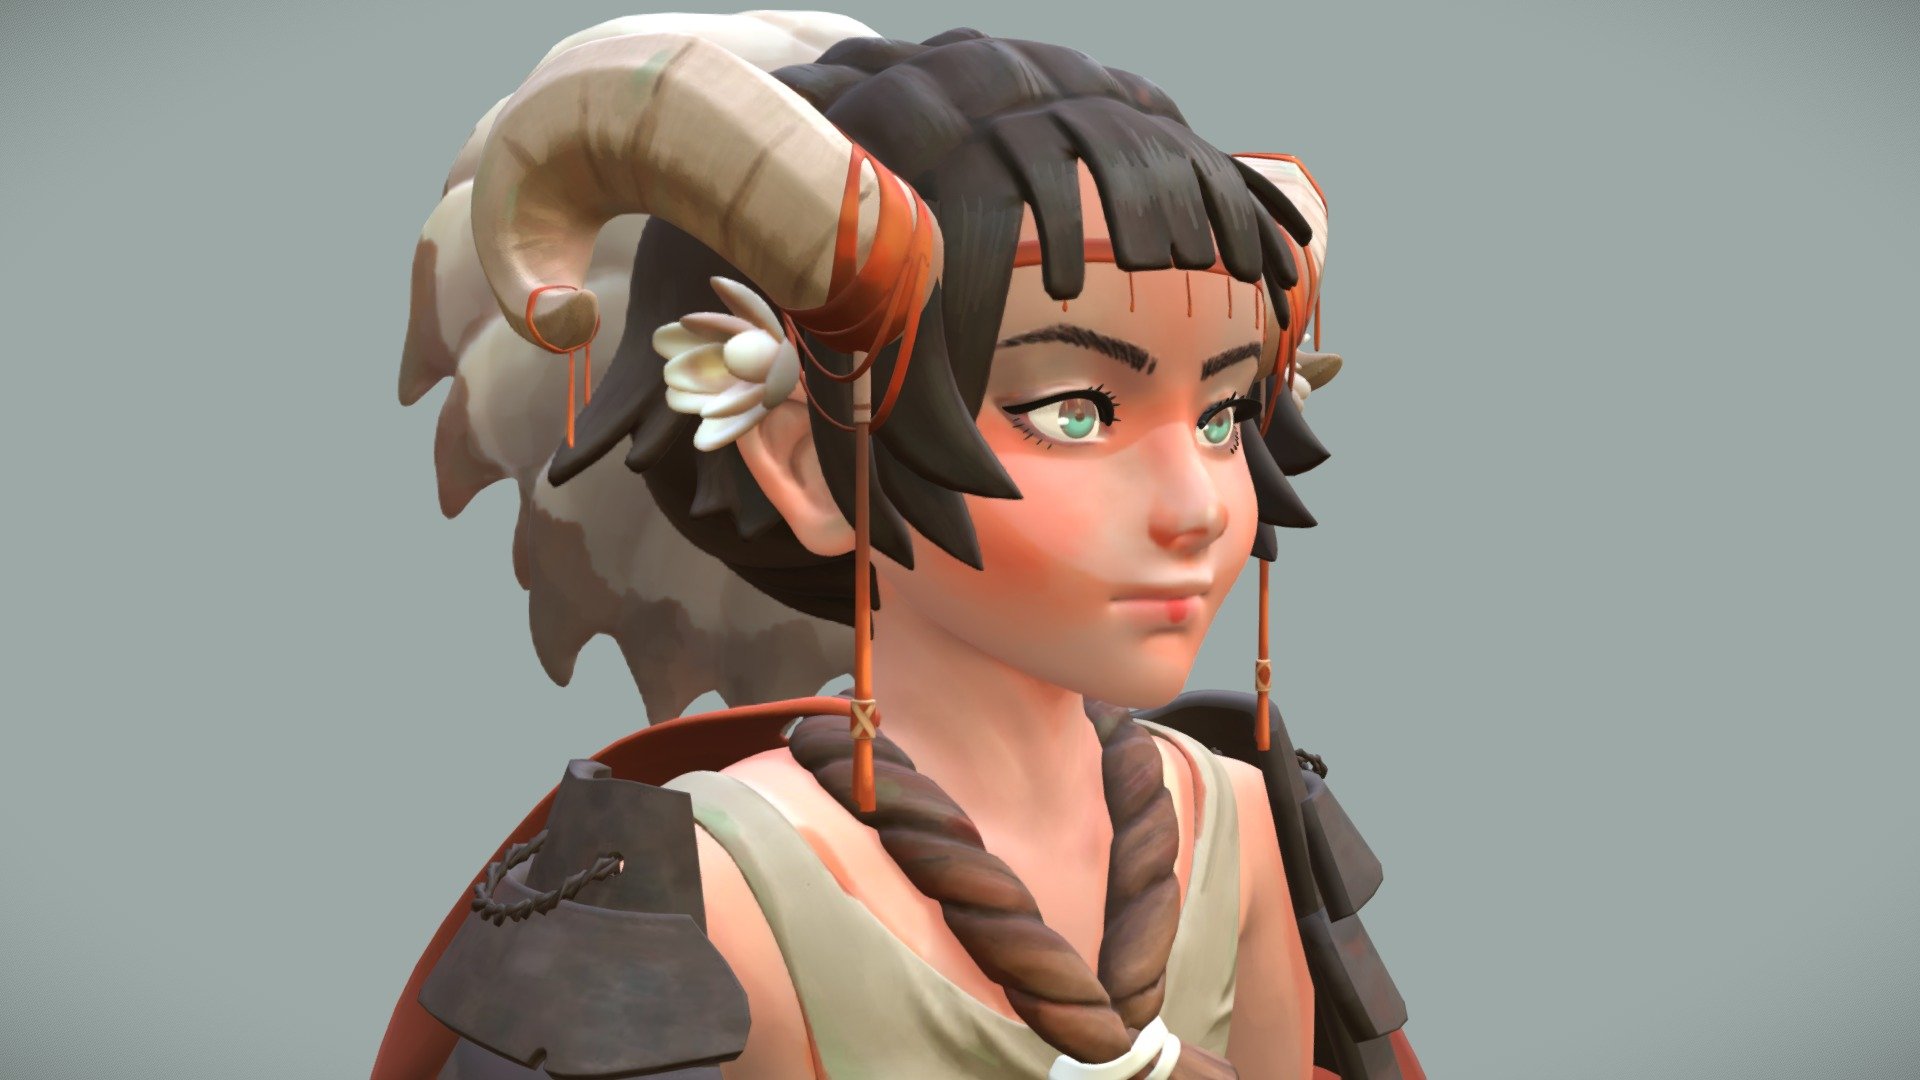 Practicing different style from what I have been posting recently.
Really enjoyed reproducing the beautiful tone of the original work by mixing subtle colors on her skin, eyes, horns, etc.

3D rendition of Ram Knight by GUWEIZ, check out her awesome works on her twitter account!
 - Ram Knight - 3D model by Akiko.Tomiyoshi 3d model